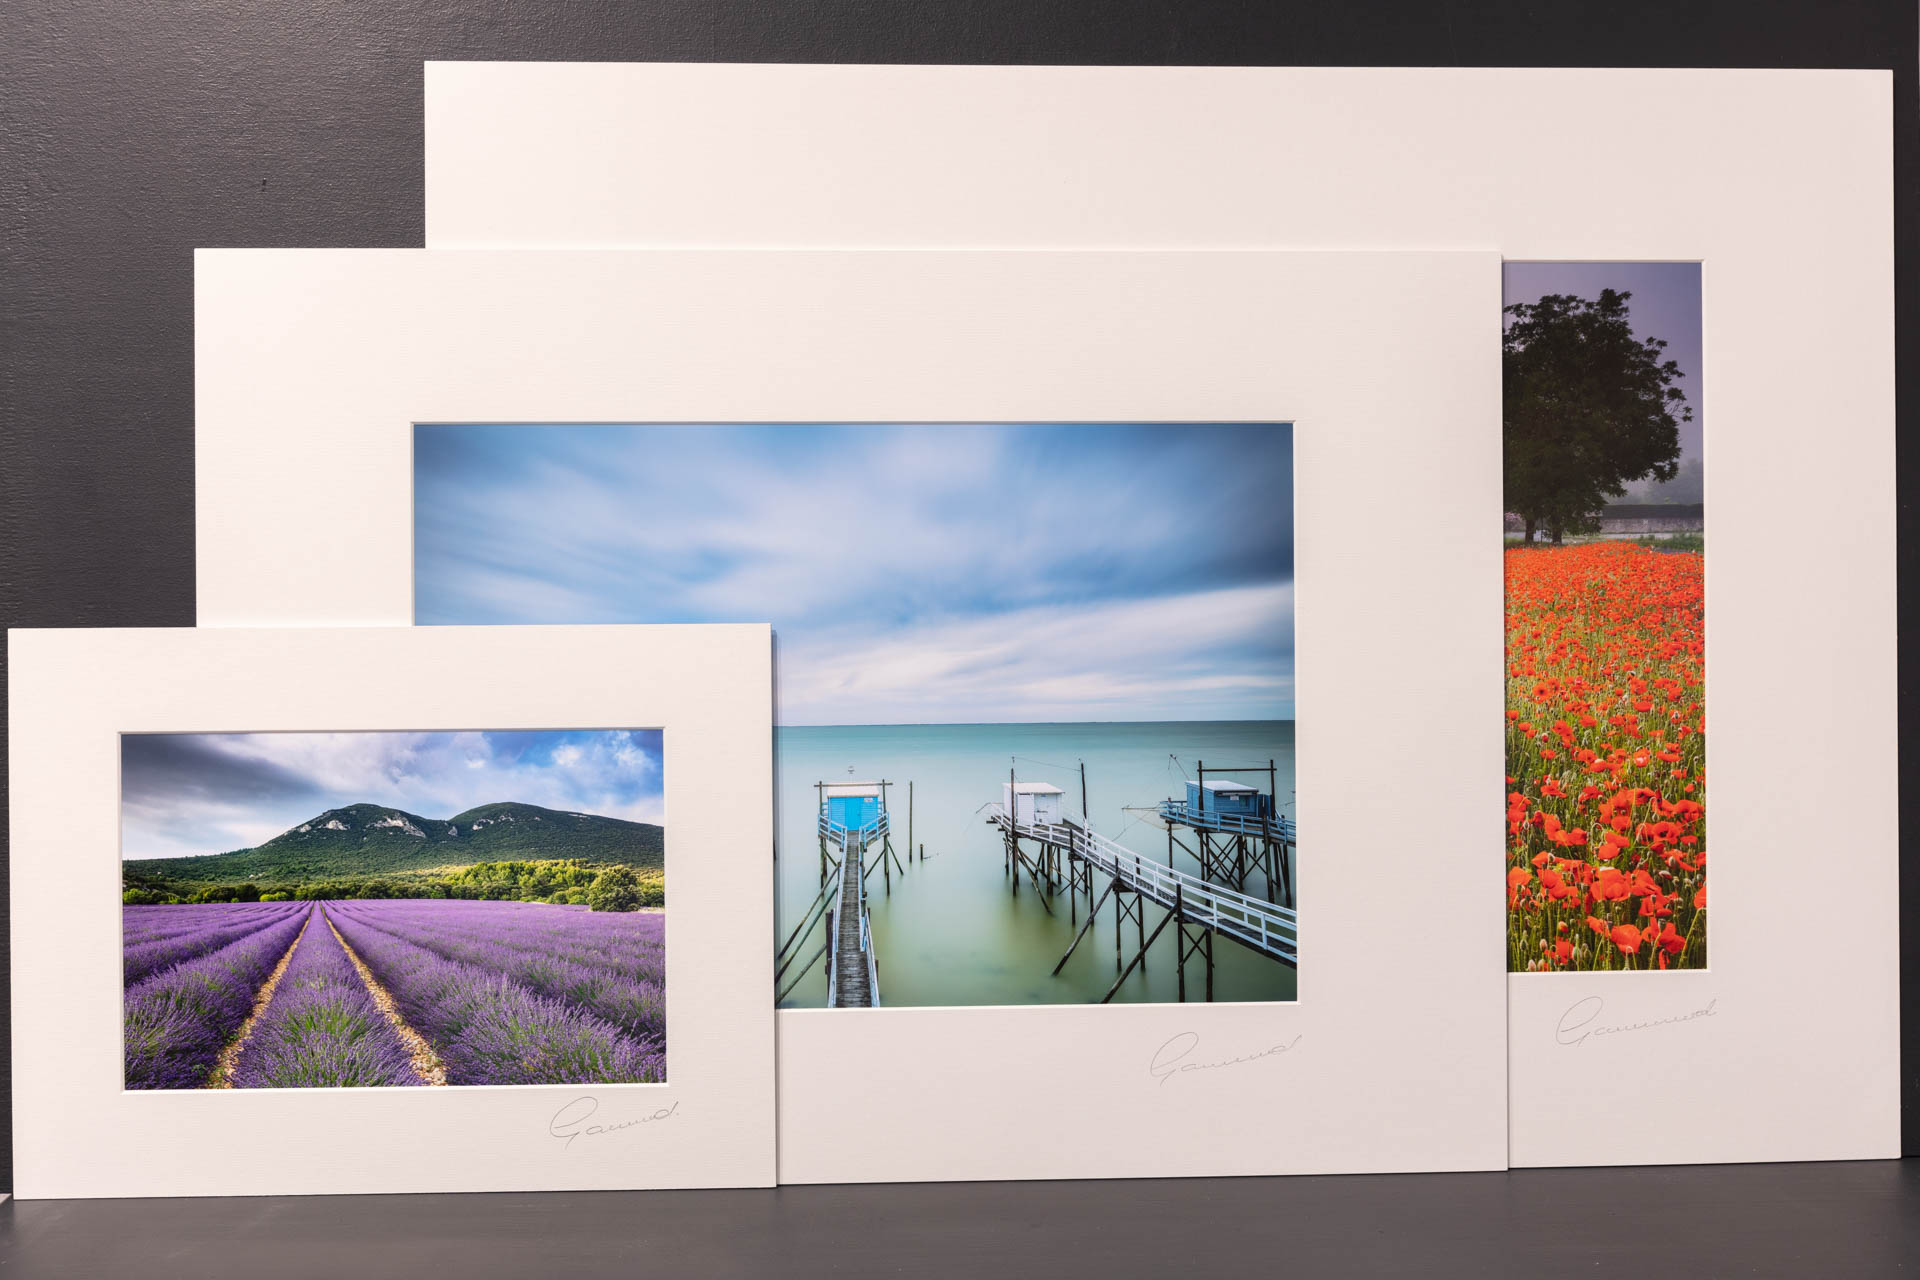 Mounted & Signed Images in Standard Frame Sizes